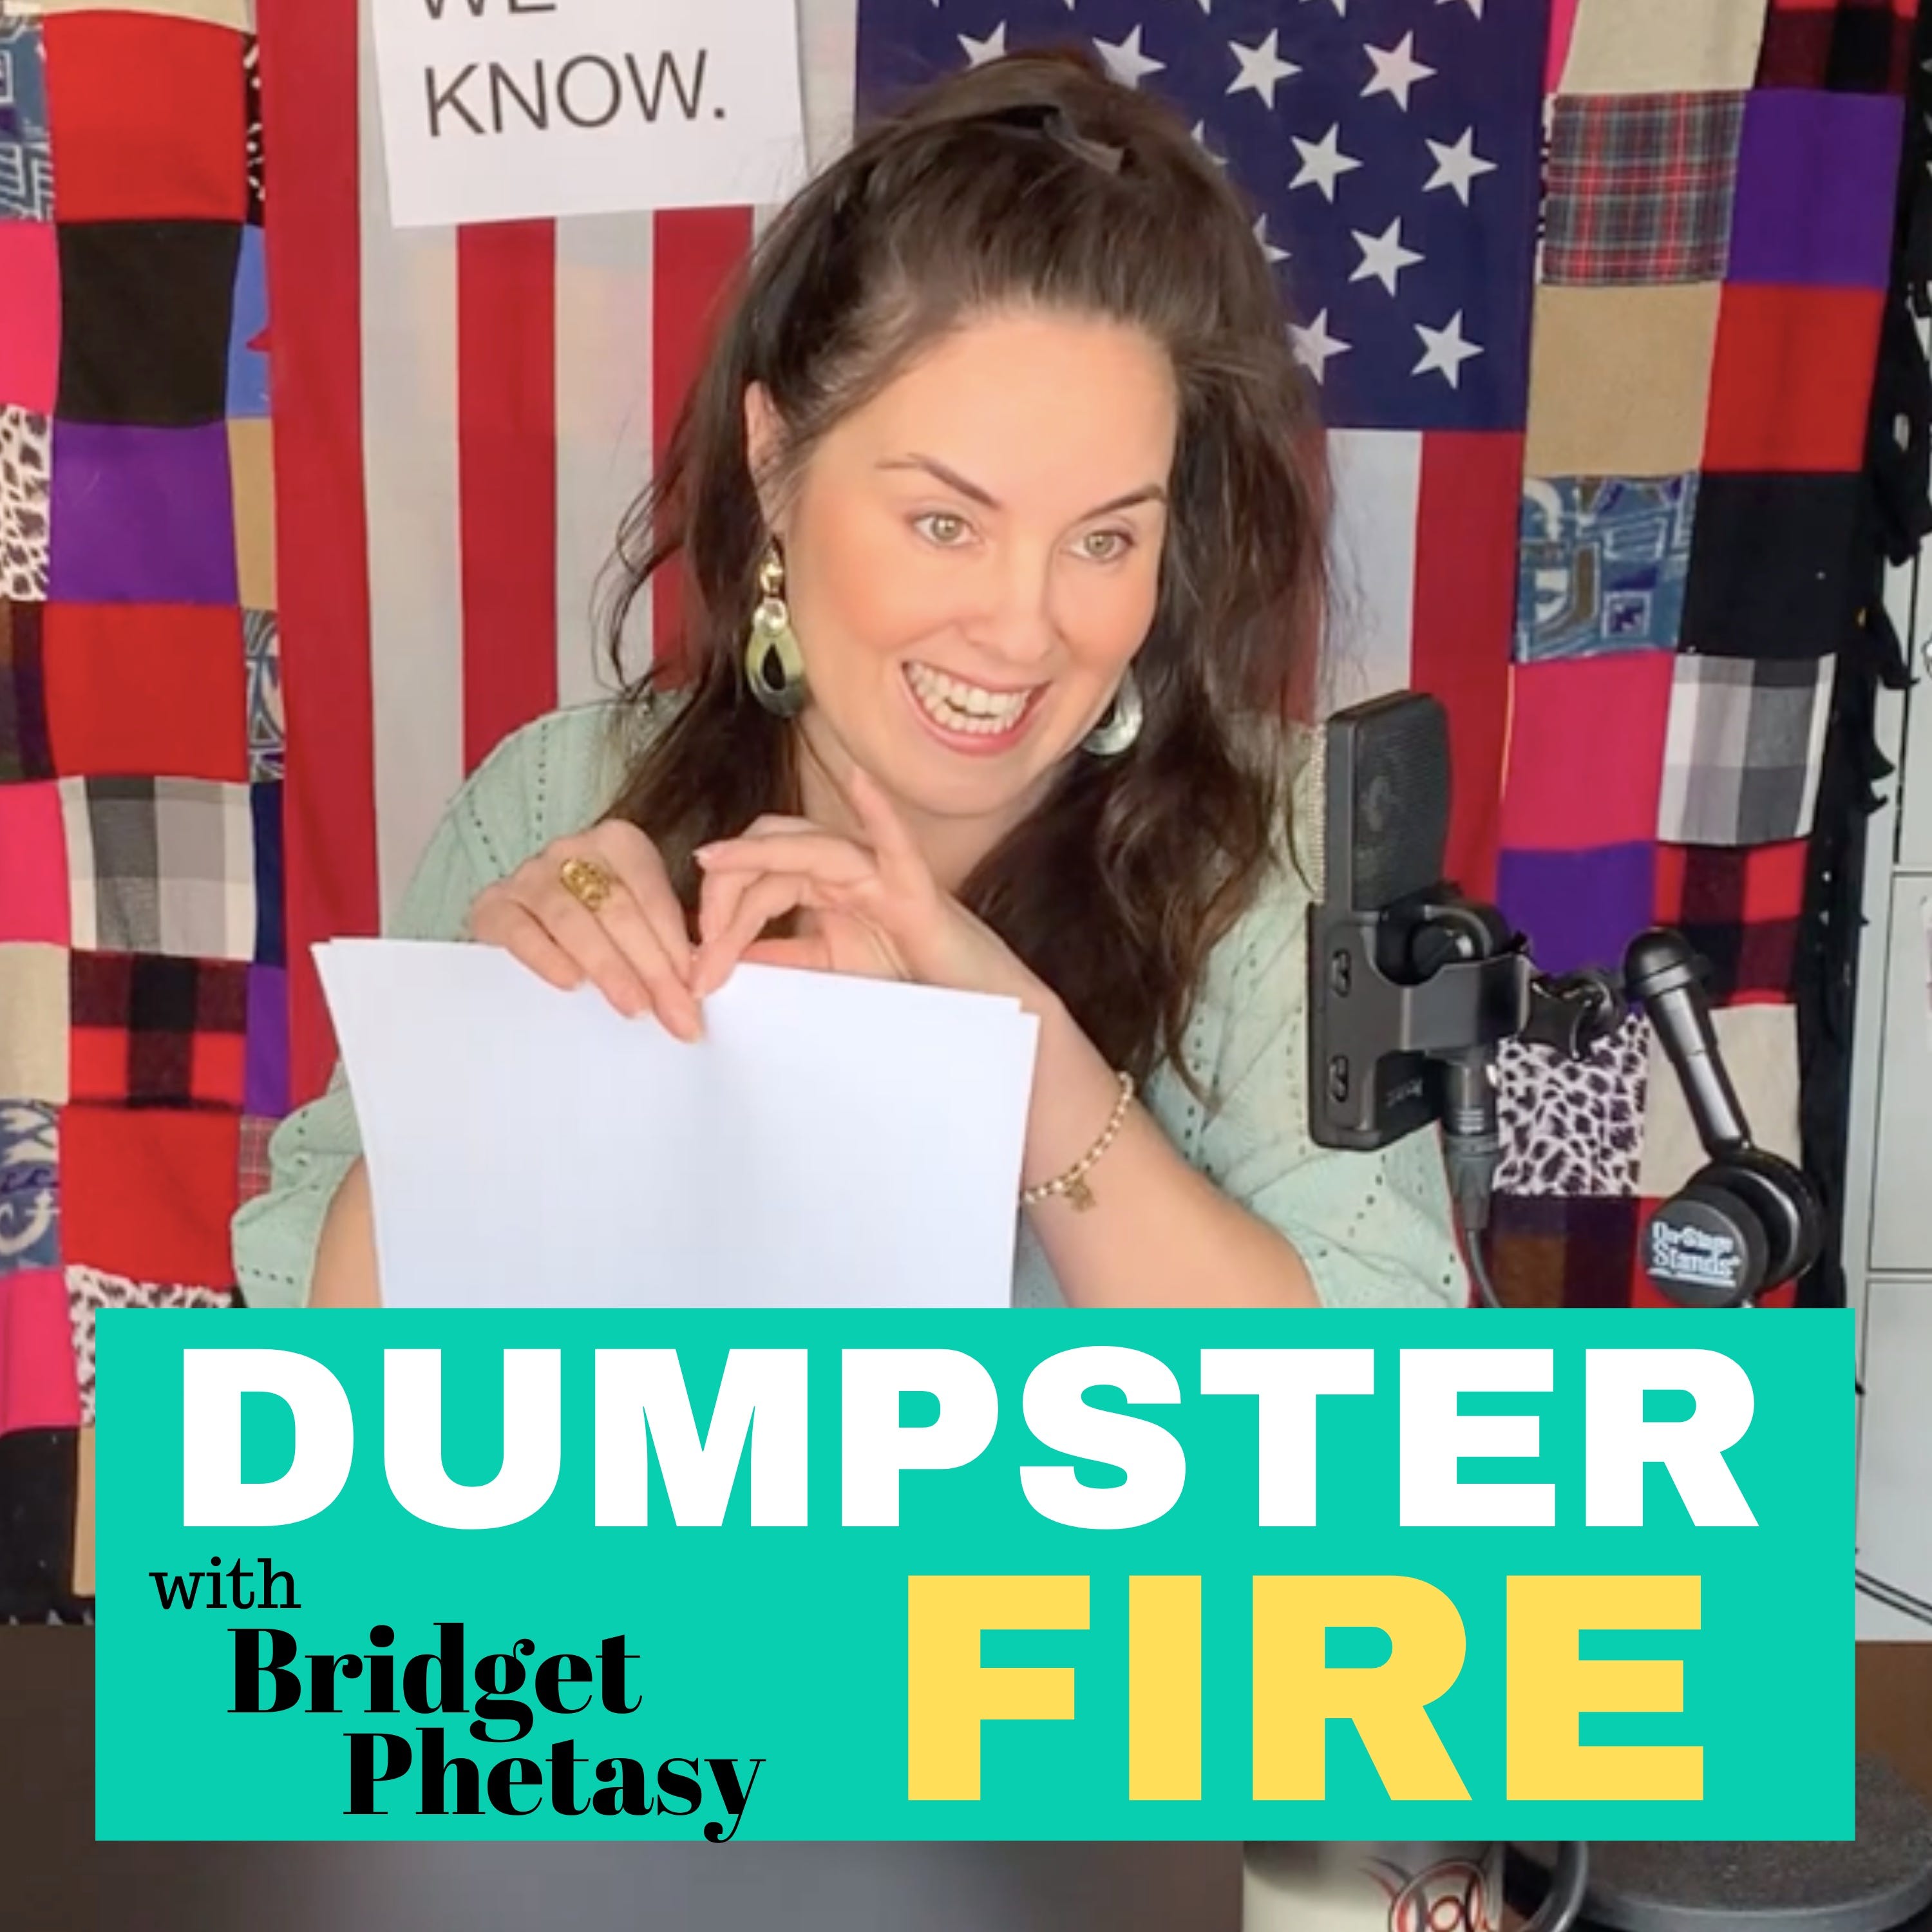 Dumpster Fire 15 - Pu$$y Grabbing Should Be Done In Private